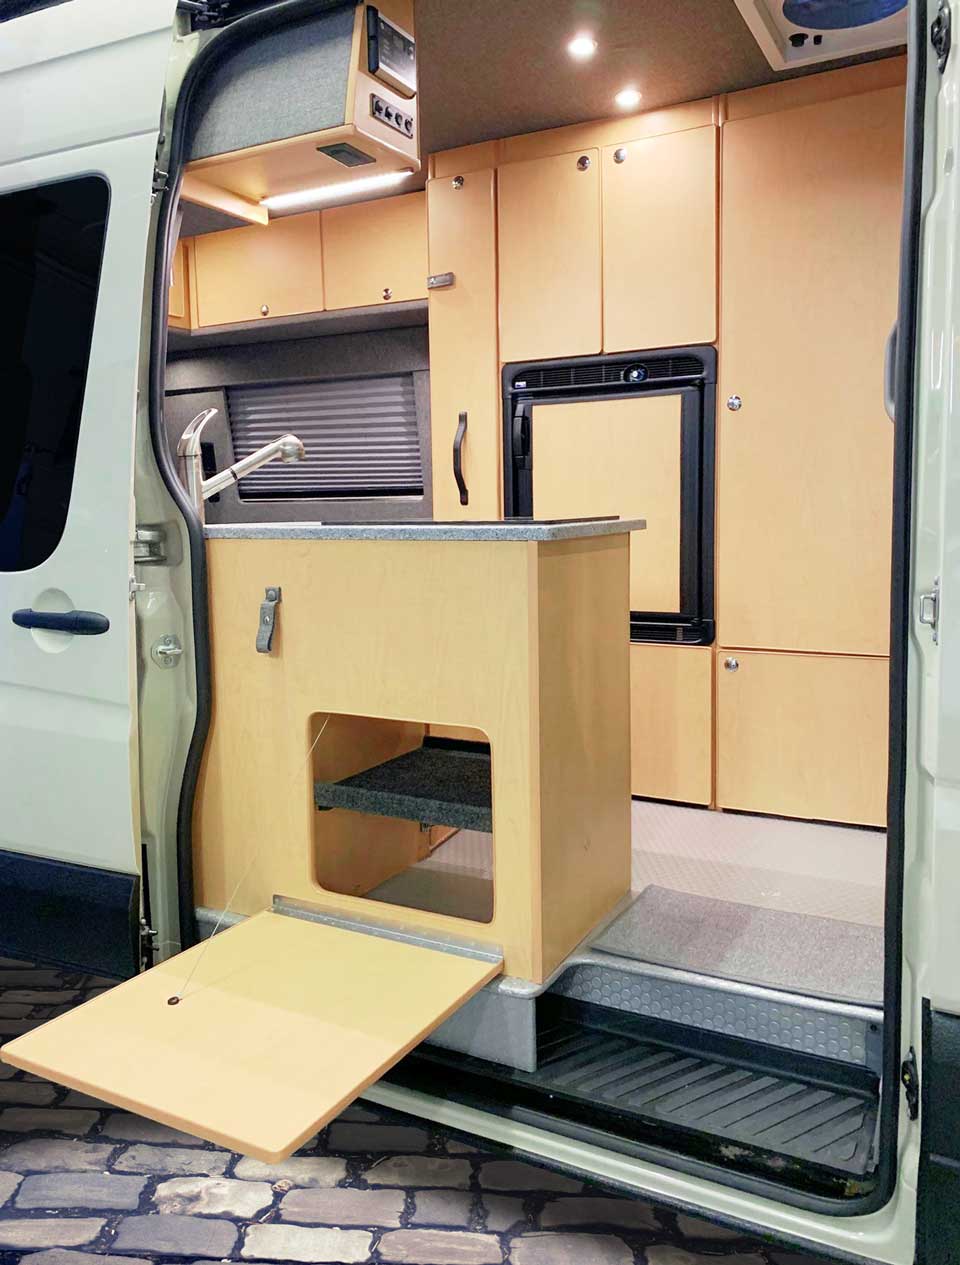 Galley cabinet features a dropdown table for outside use.